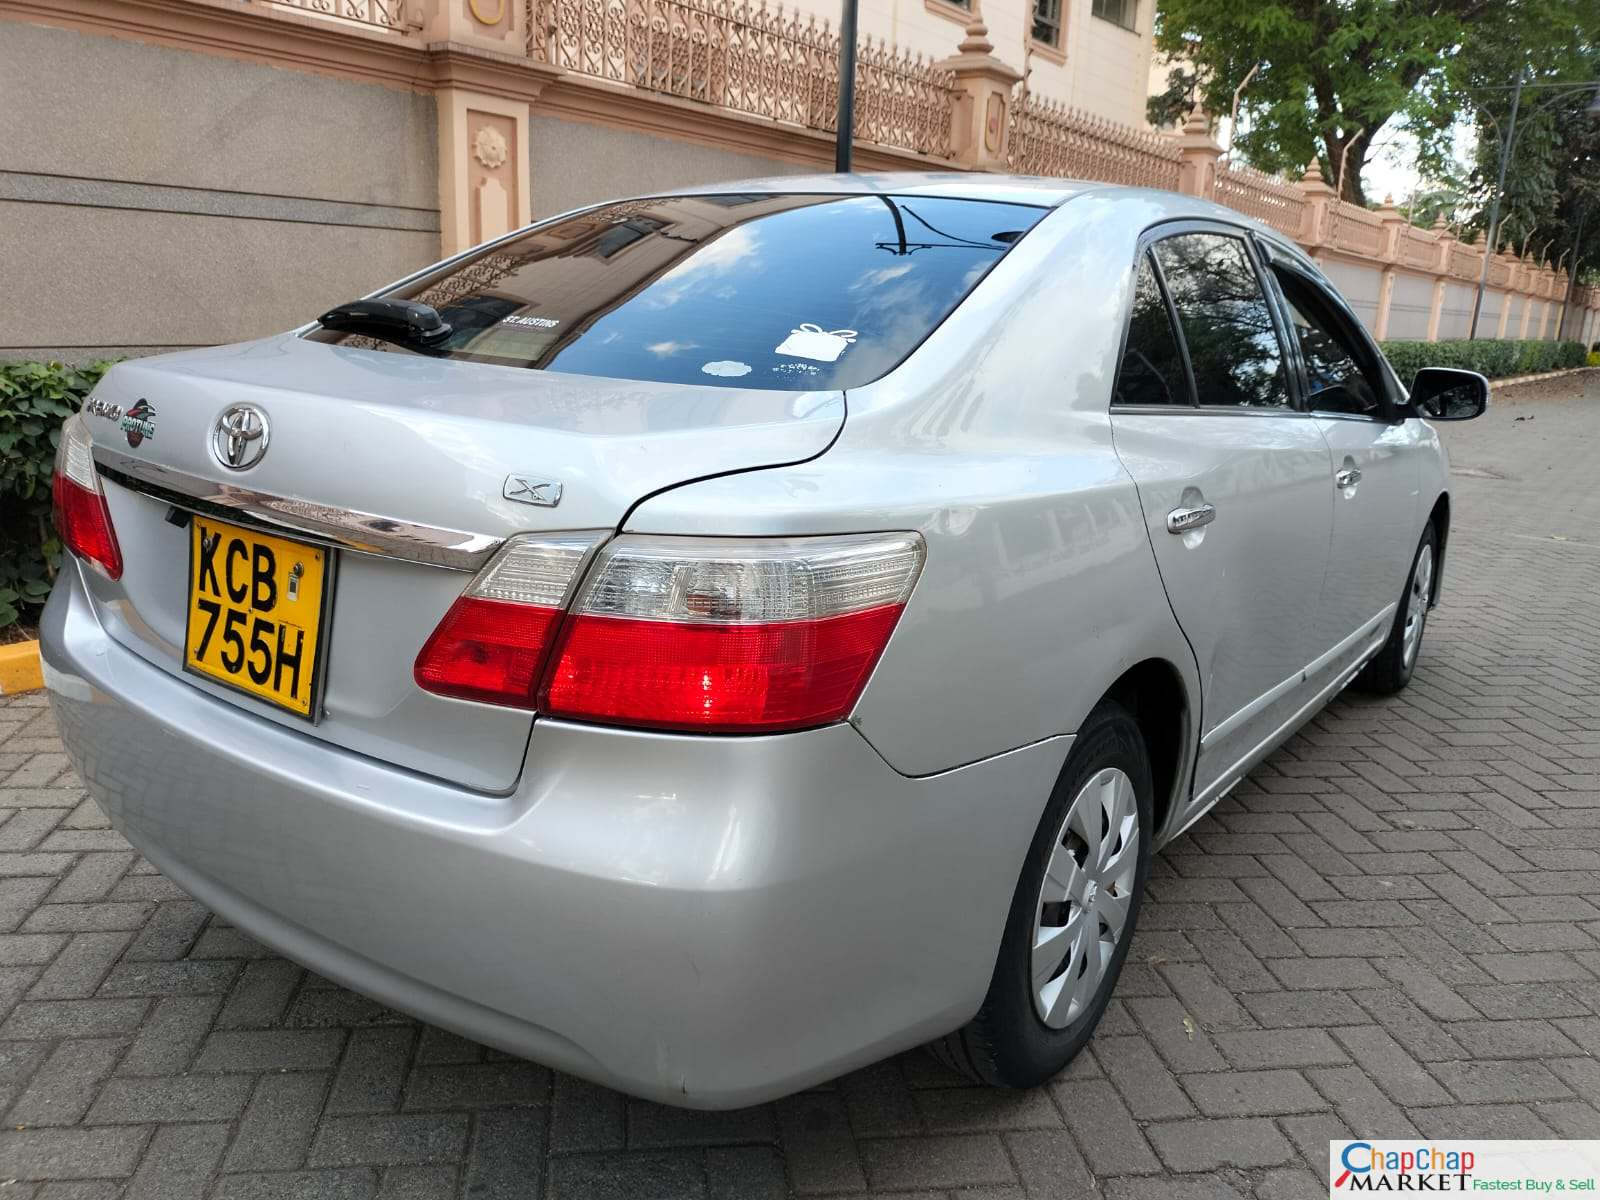 Cars For Sale Cars-Toyota PREMIO for sale in Kenya hire purchase installments You pay 30% Deposit Trade in Ok EXCLUSIVE premio kenya 260 new shape 9